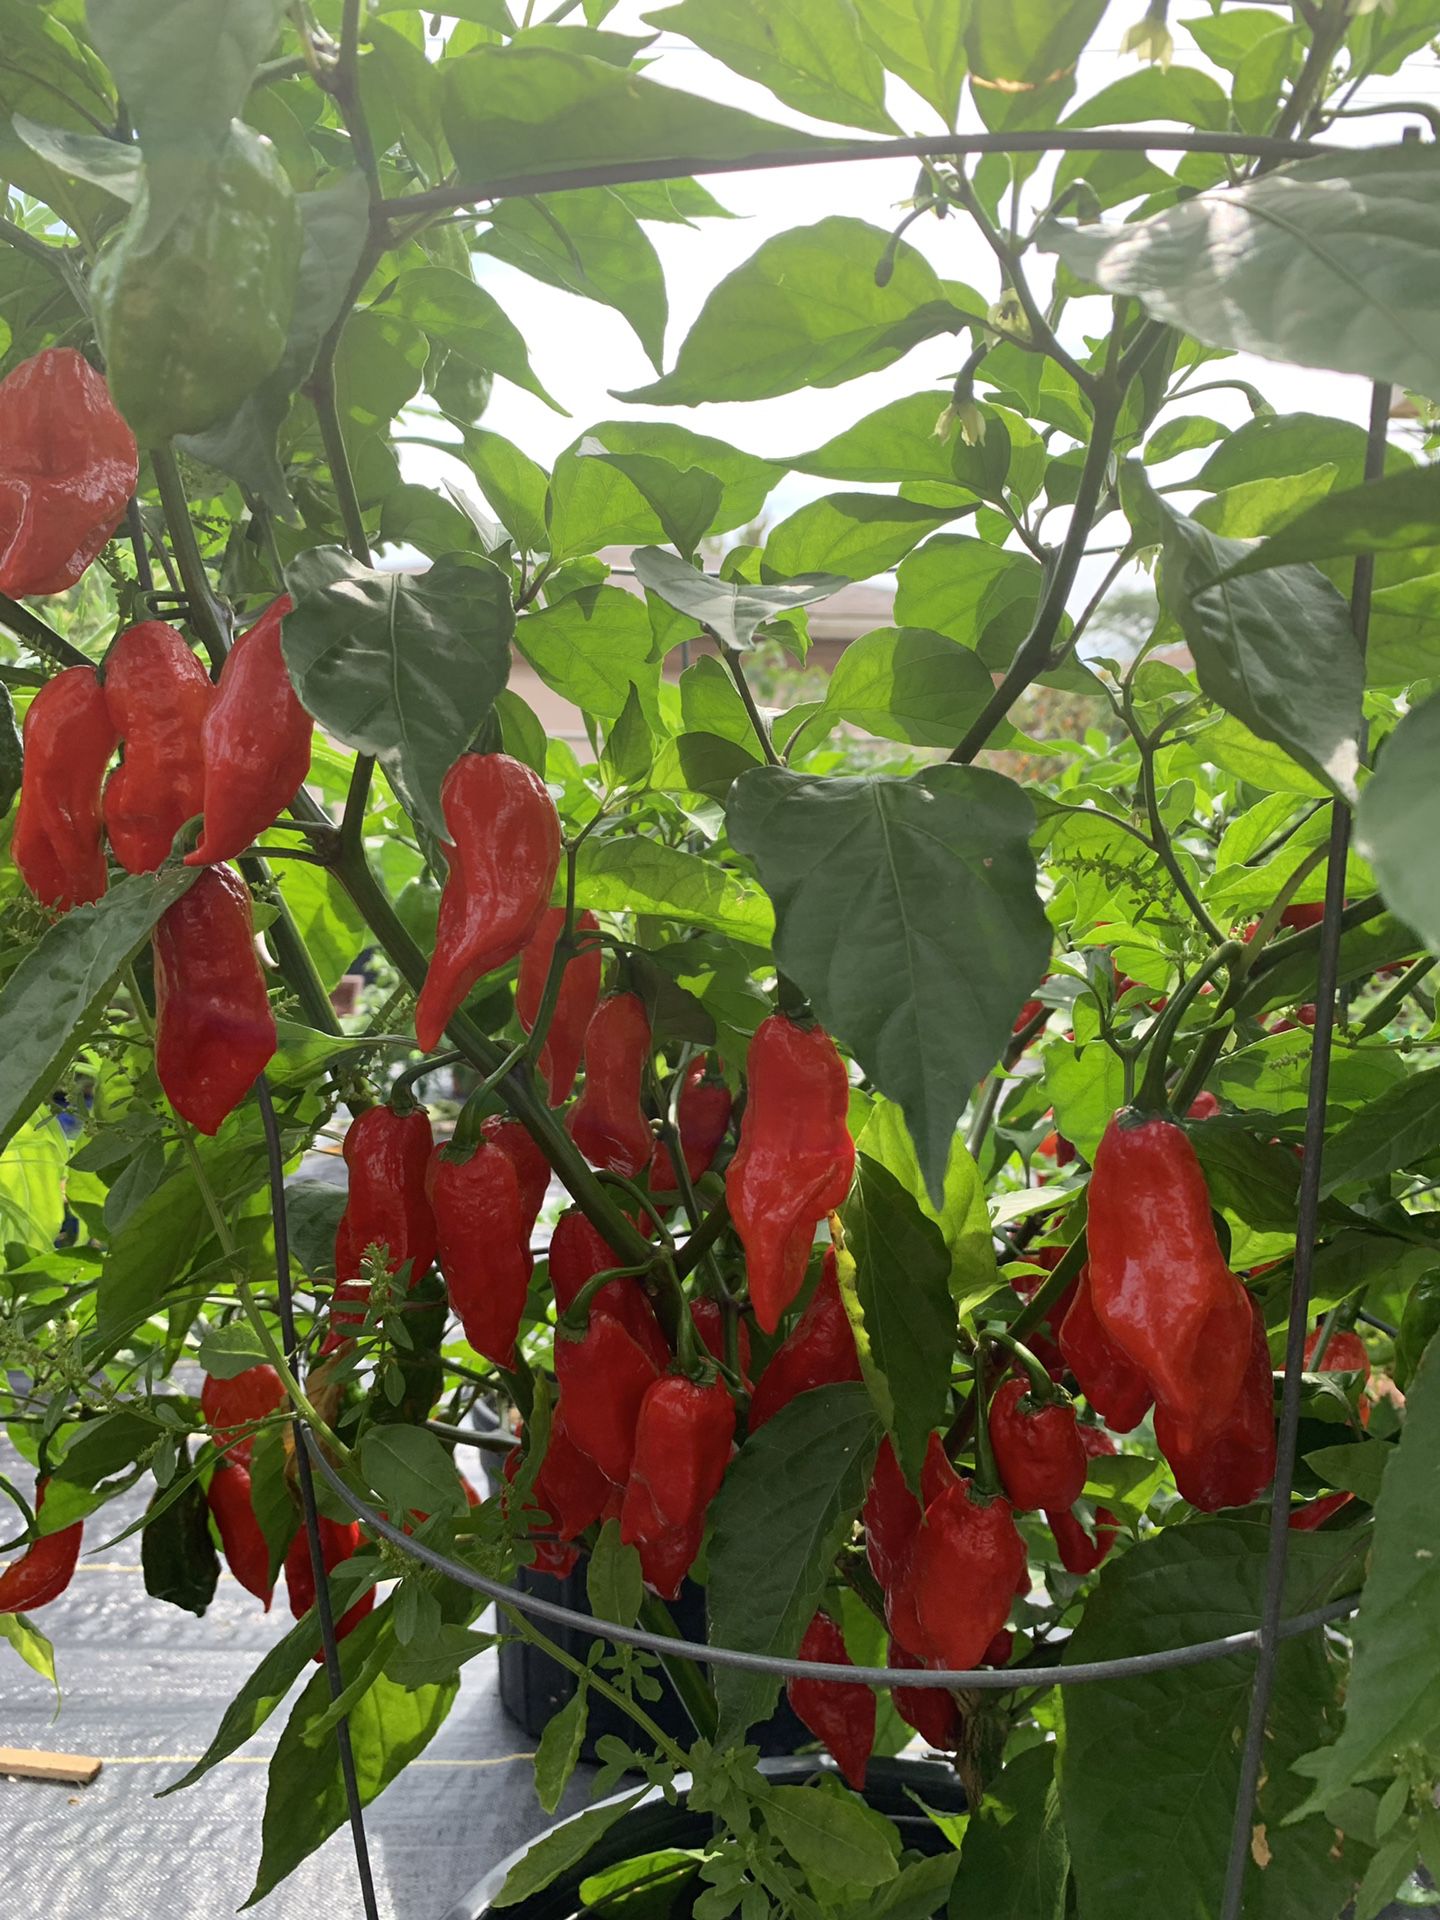 Ghost peppers 1,00 each